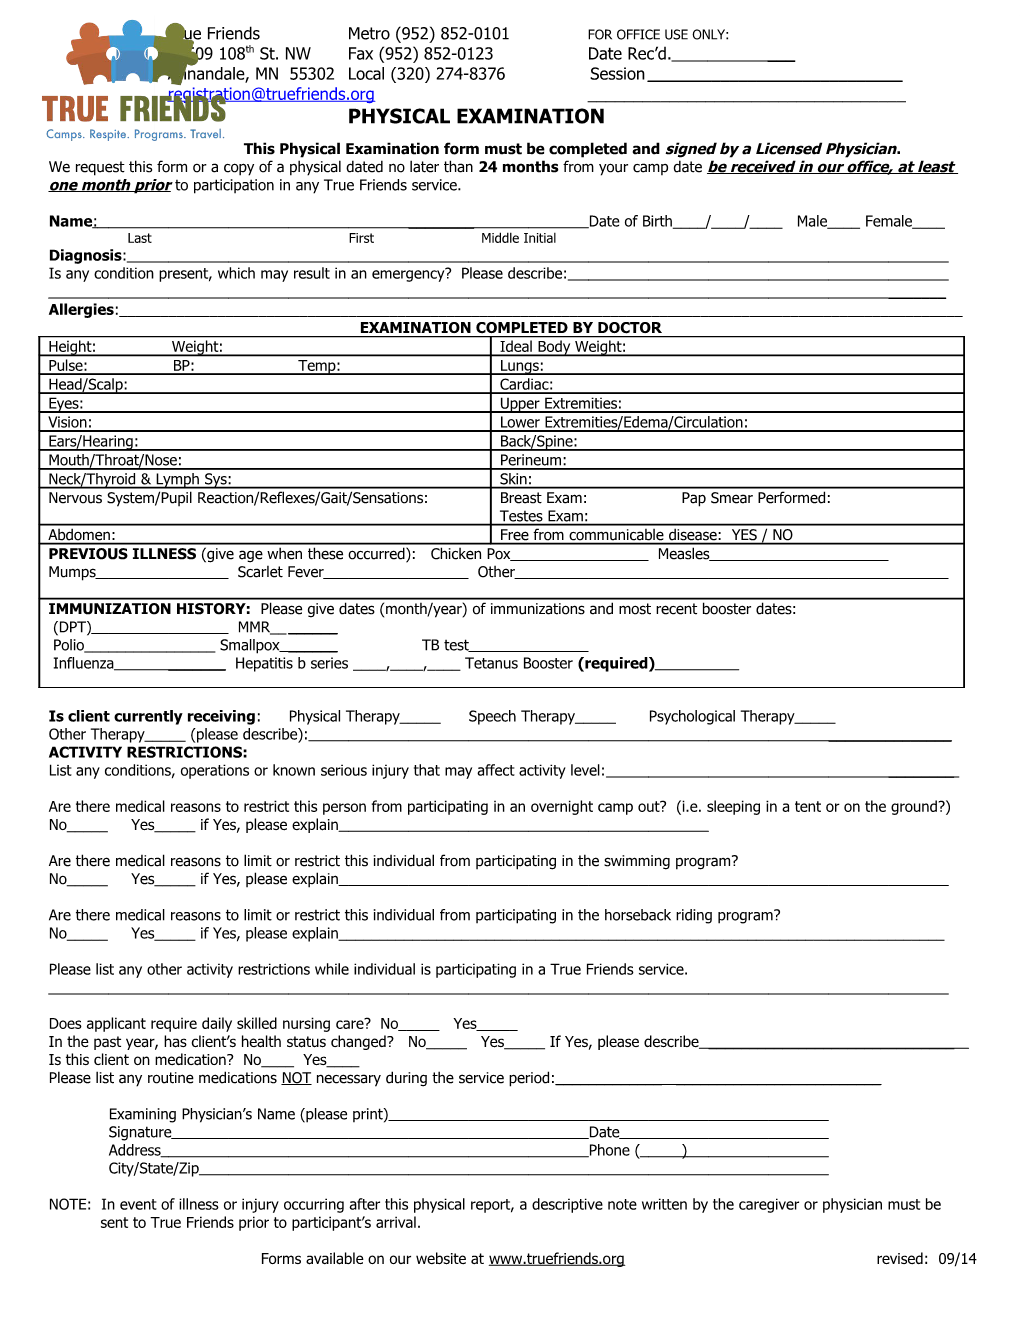 This Physical Examination Form Must Be Completed and Signed by a Licensed Physician